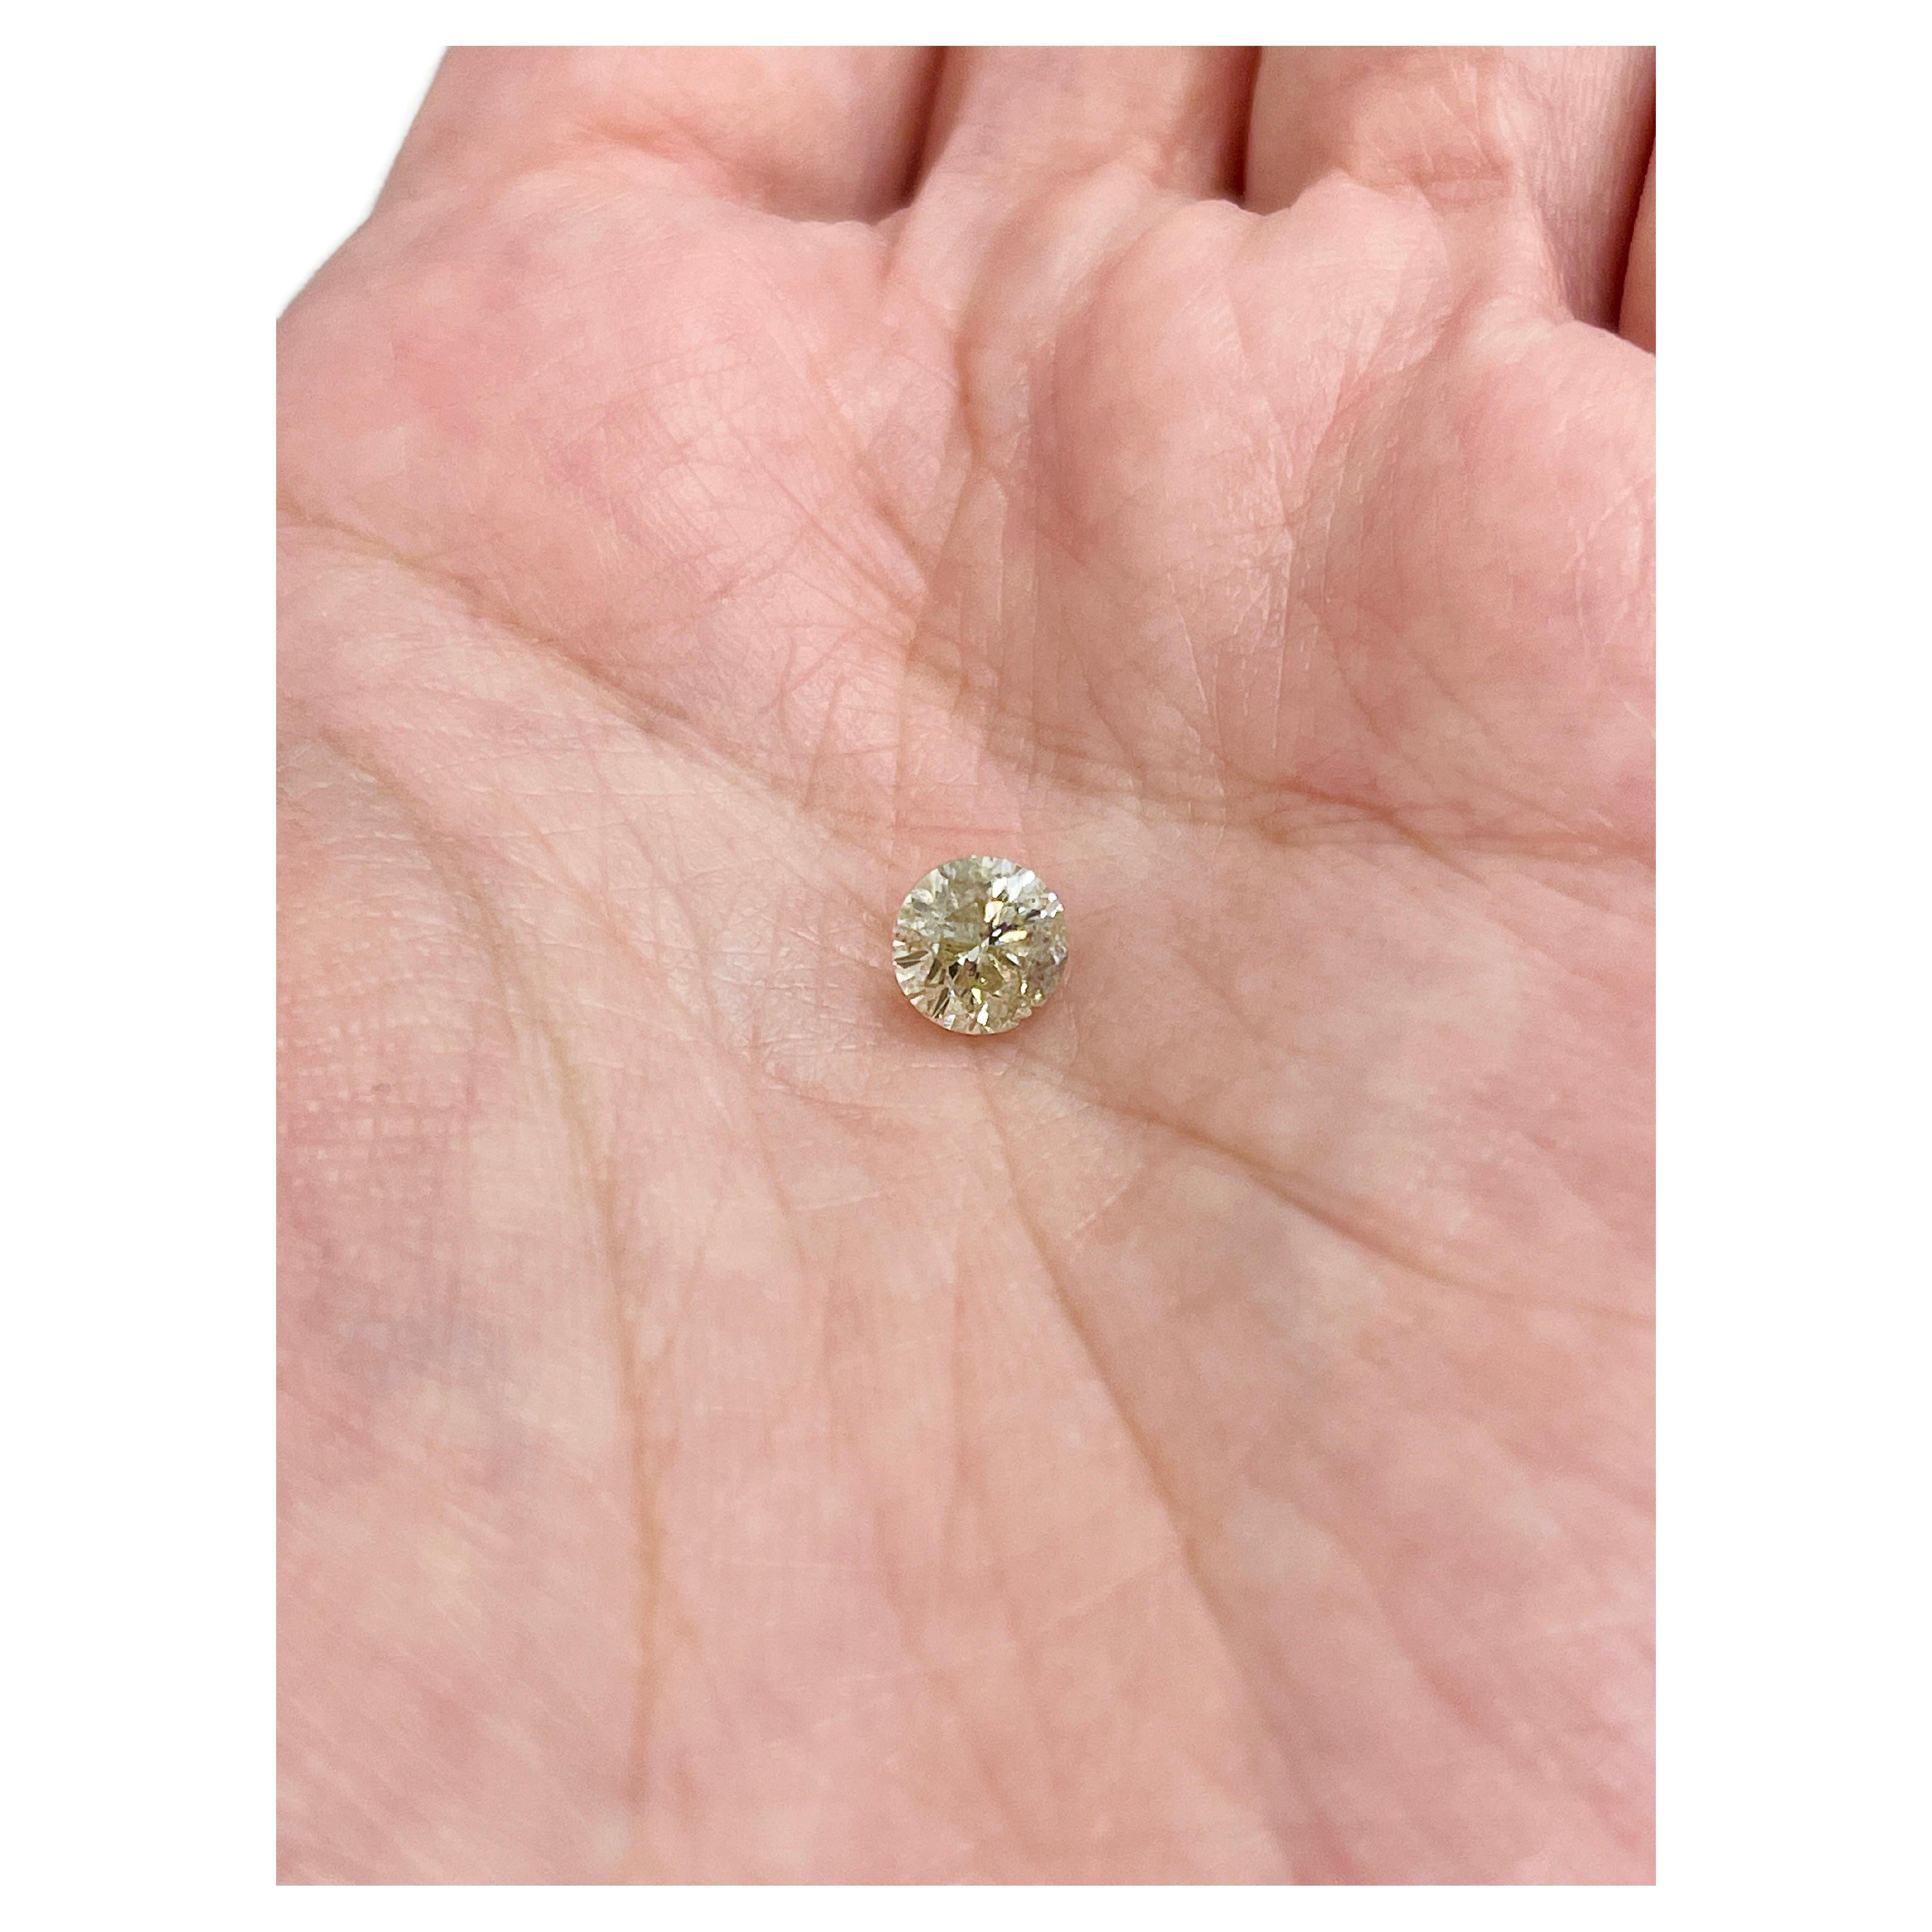 GIA Certified 1.01 Carat Round Fancy Light Yellow Color Diamond

Natural Diamond, measures 5.89 x 6.02 x 4.23 mm, I3 Clarity

Free shipping within the US*